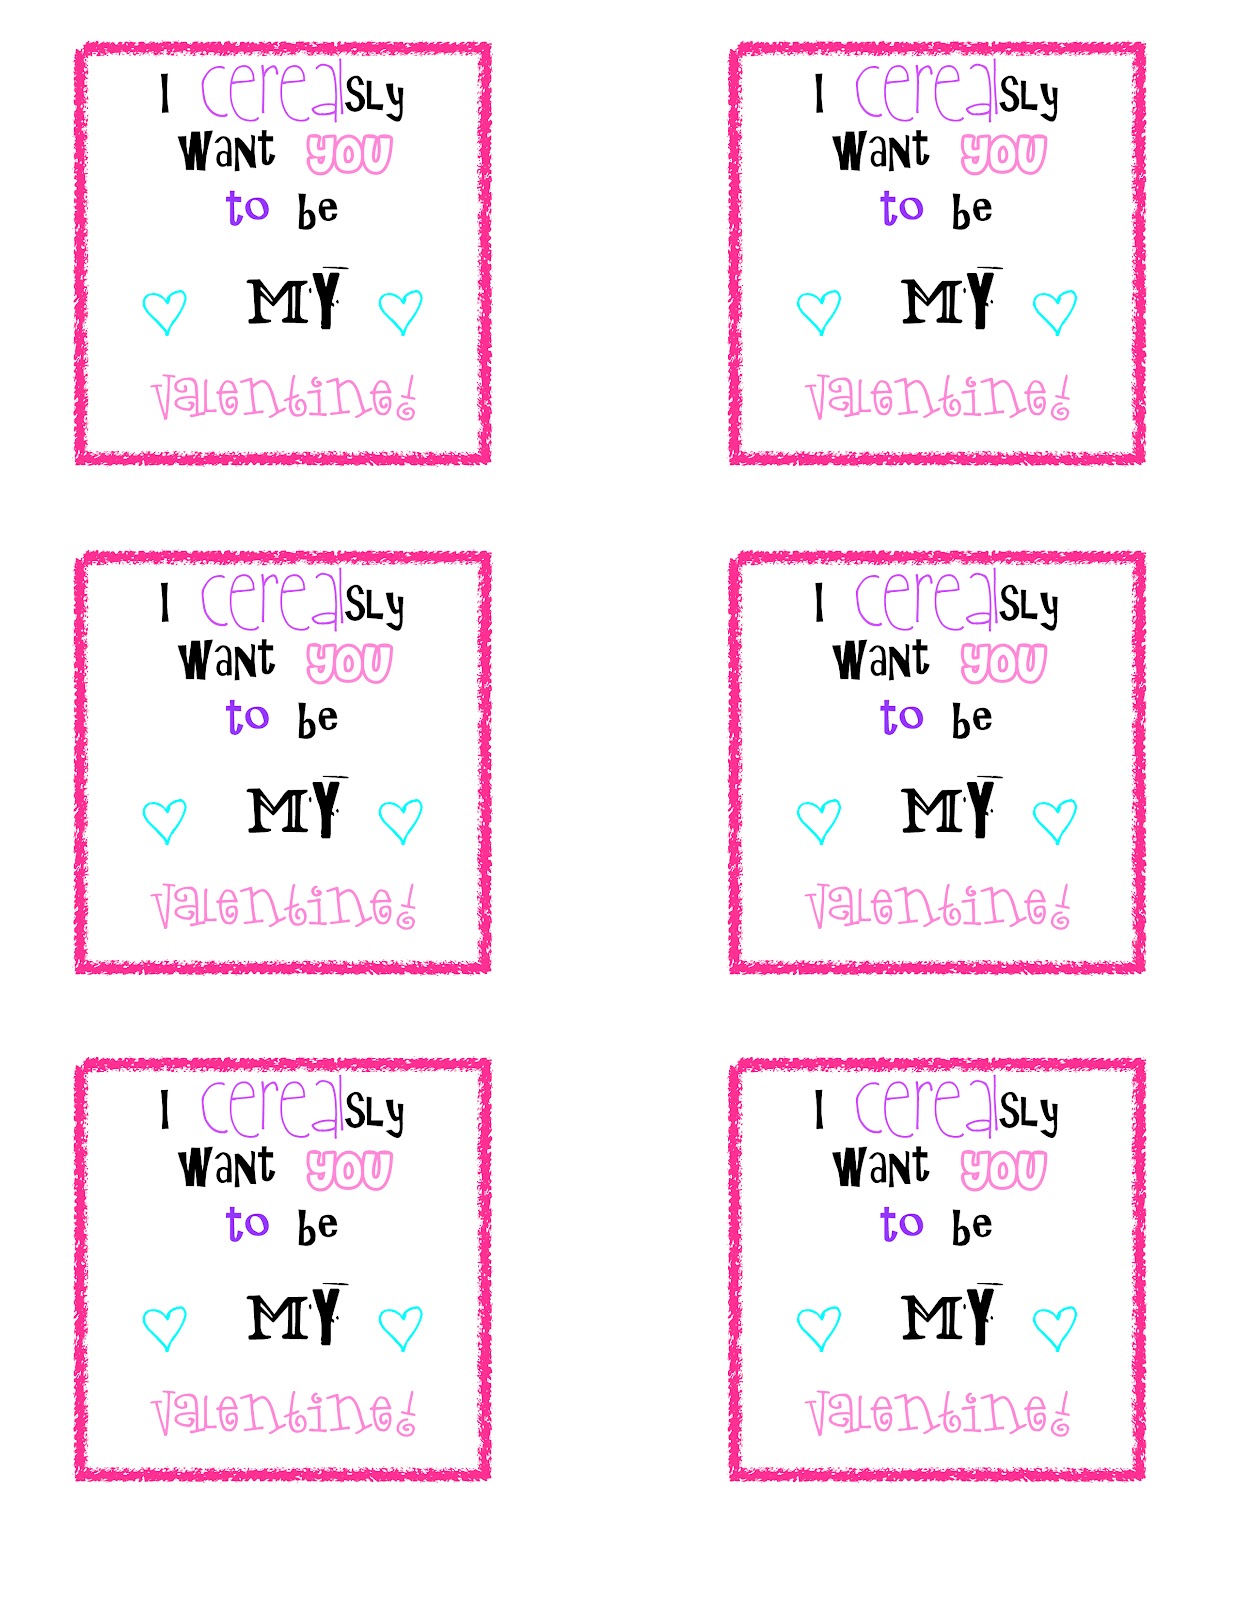 i-cerealsly-want-you-to-be-my-valentine-free-printable-a-sparkle-of